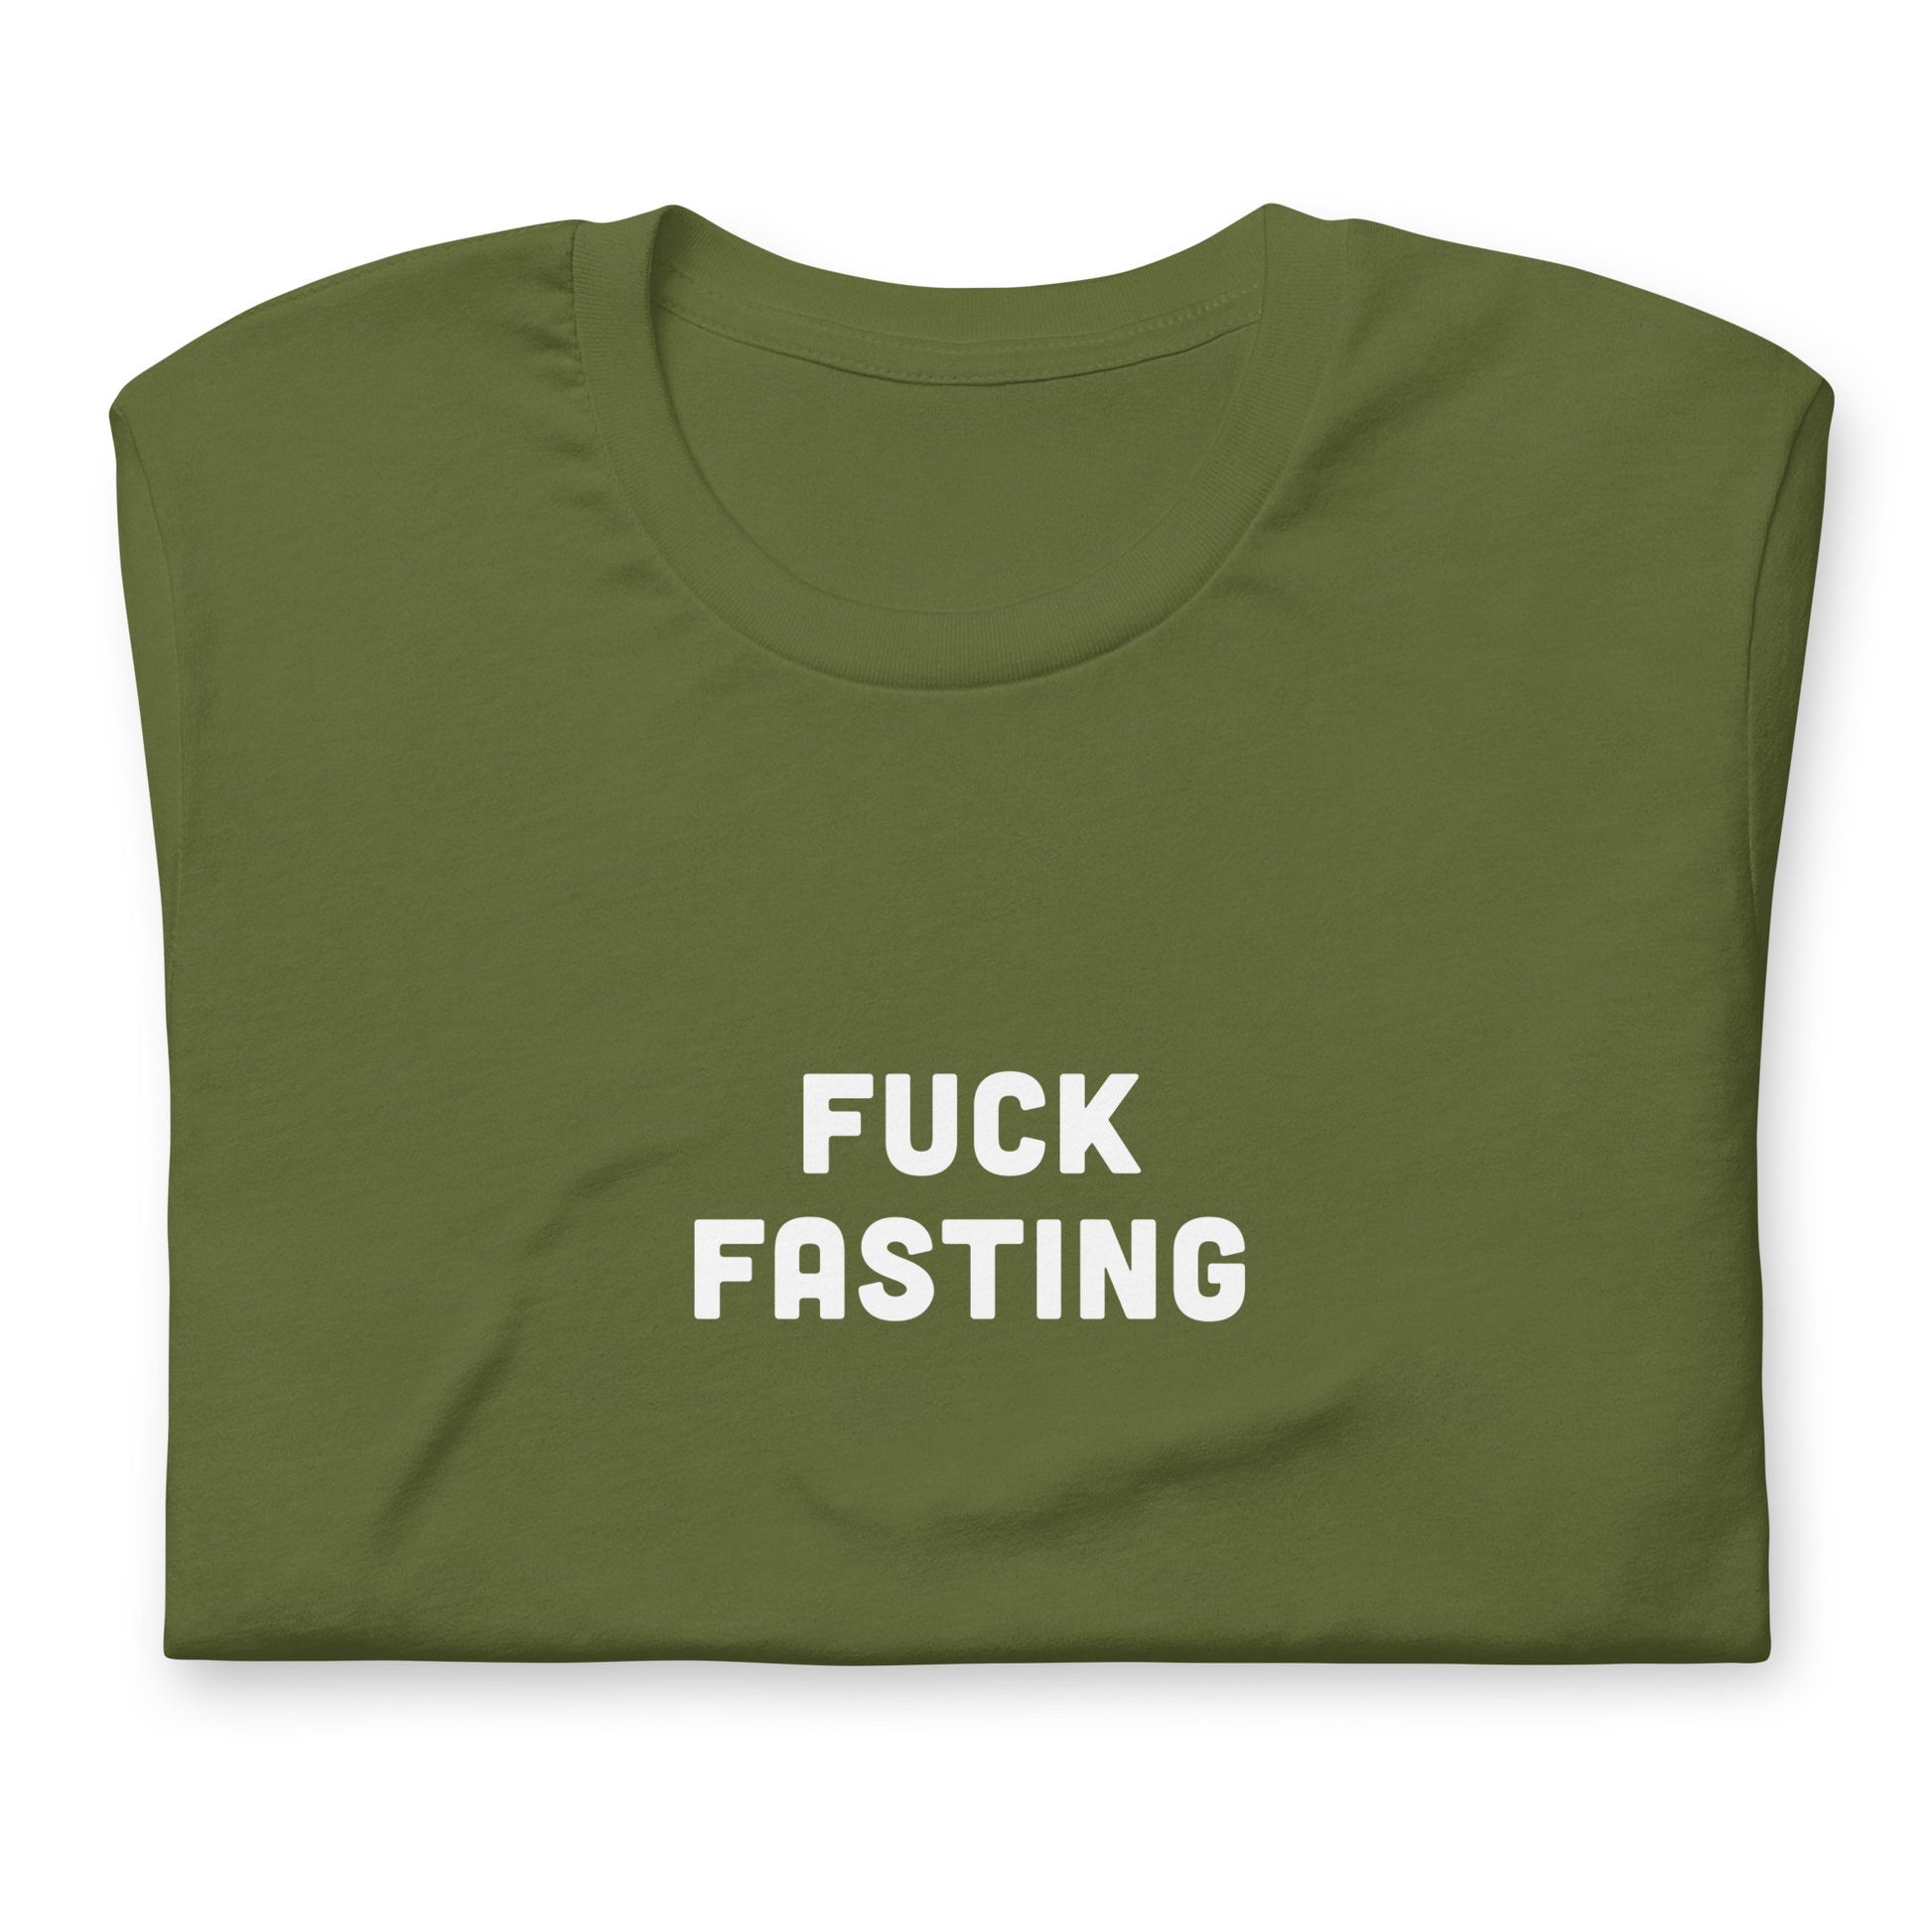 Fuck Fasting T-Shirt Size S Color Navy